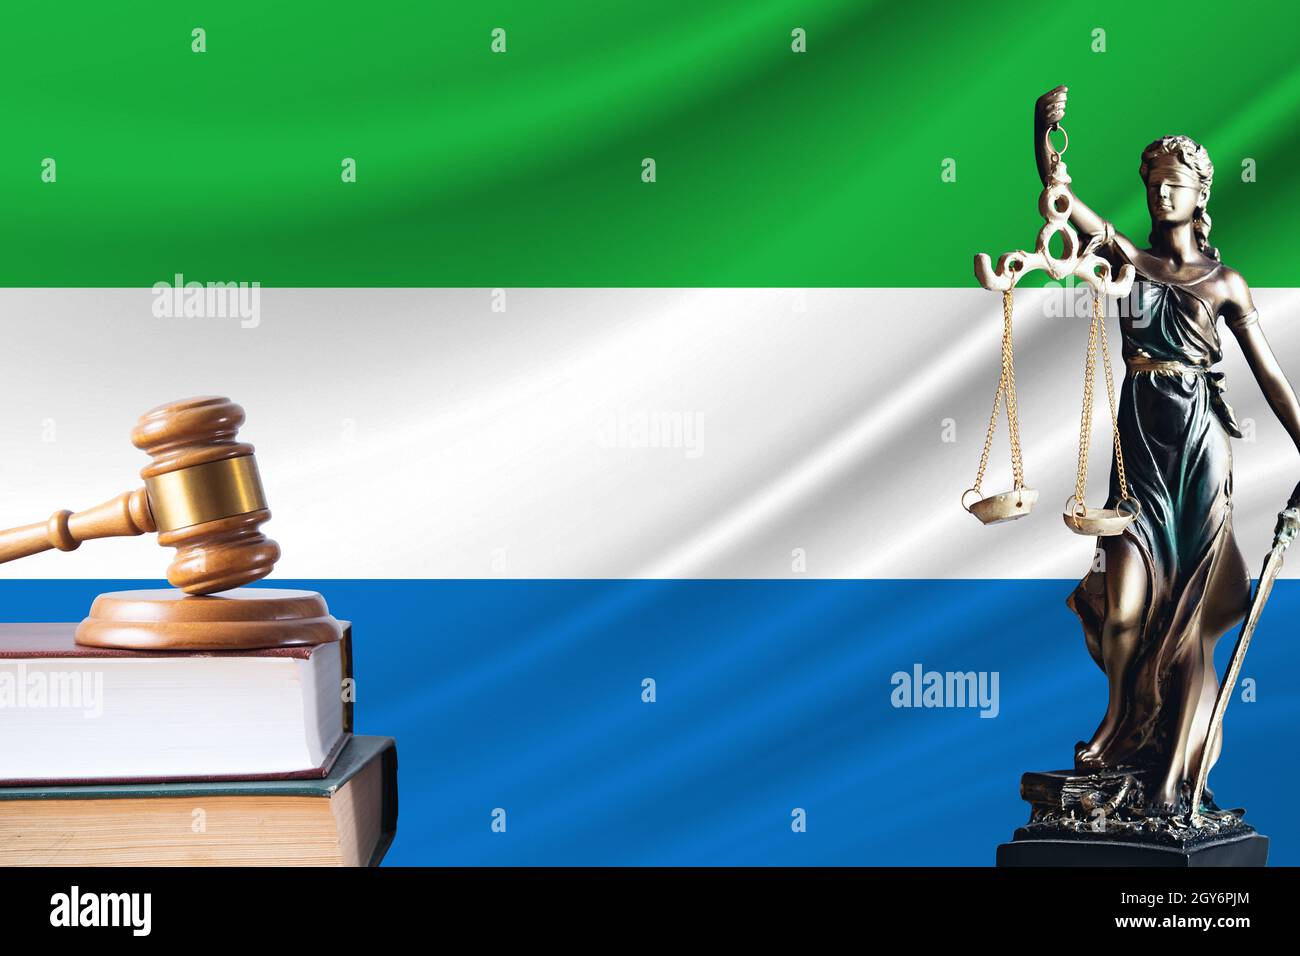 Law and justice in Sierra Leone. Statue of themis and the gavel of the judge against the background of the flag of Sierra Leone. Law and justice conce Stock Photo